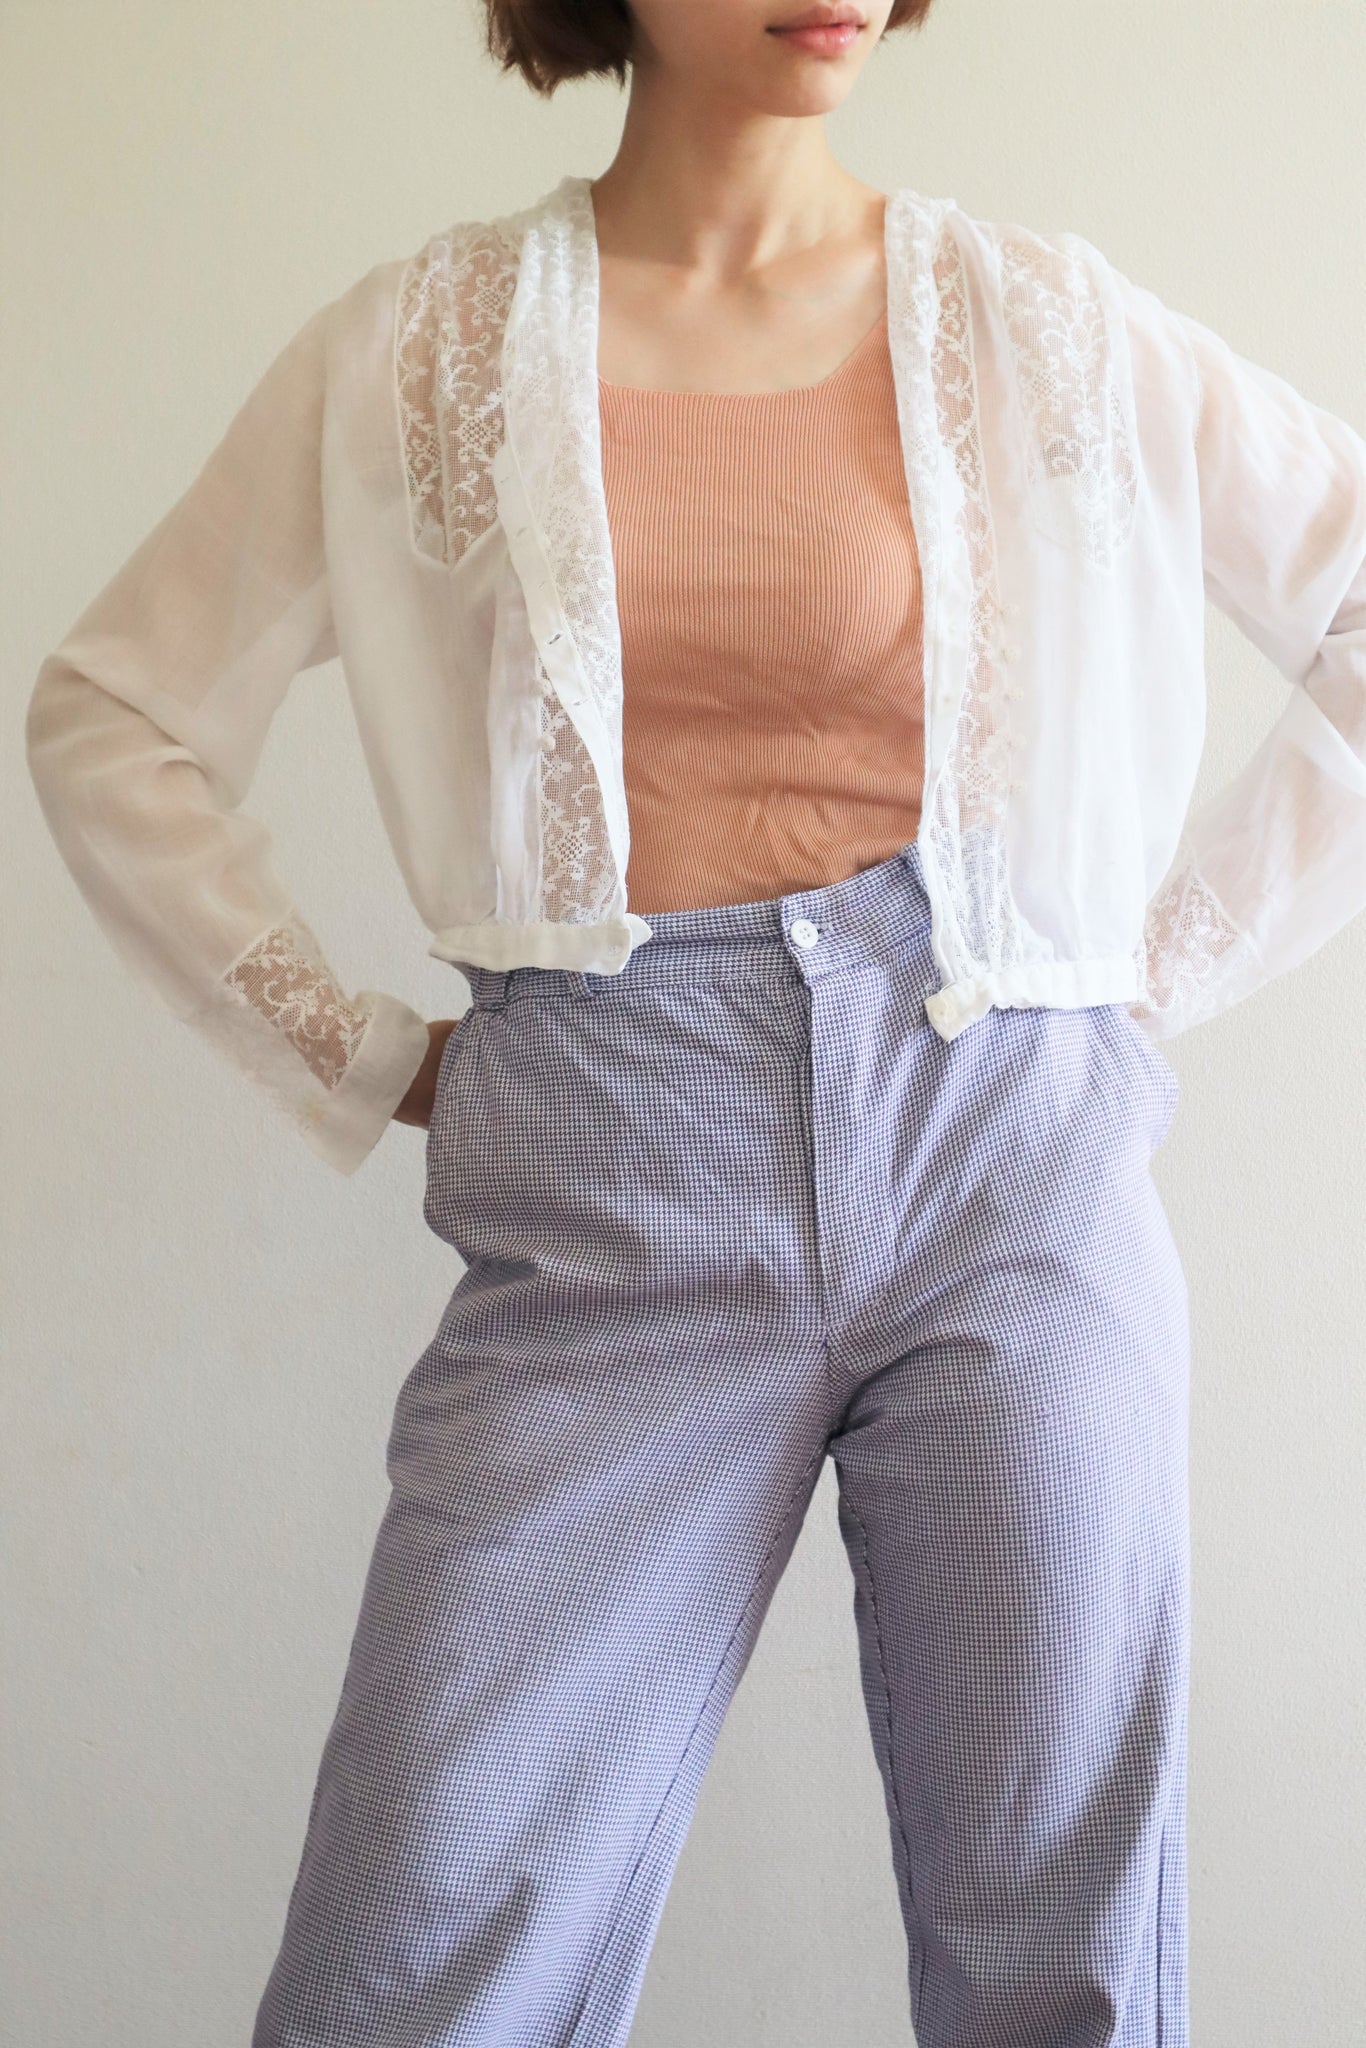 80s White And Purple Staggered Cotton Pants